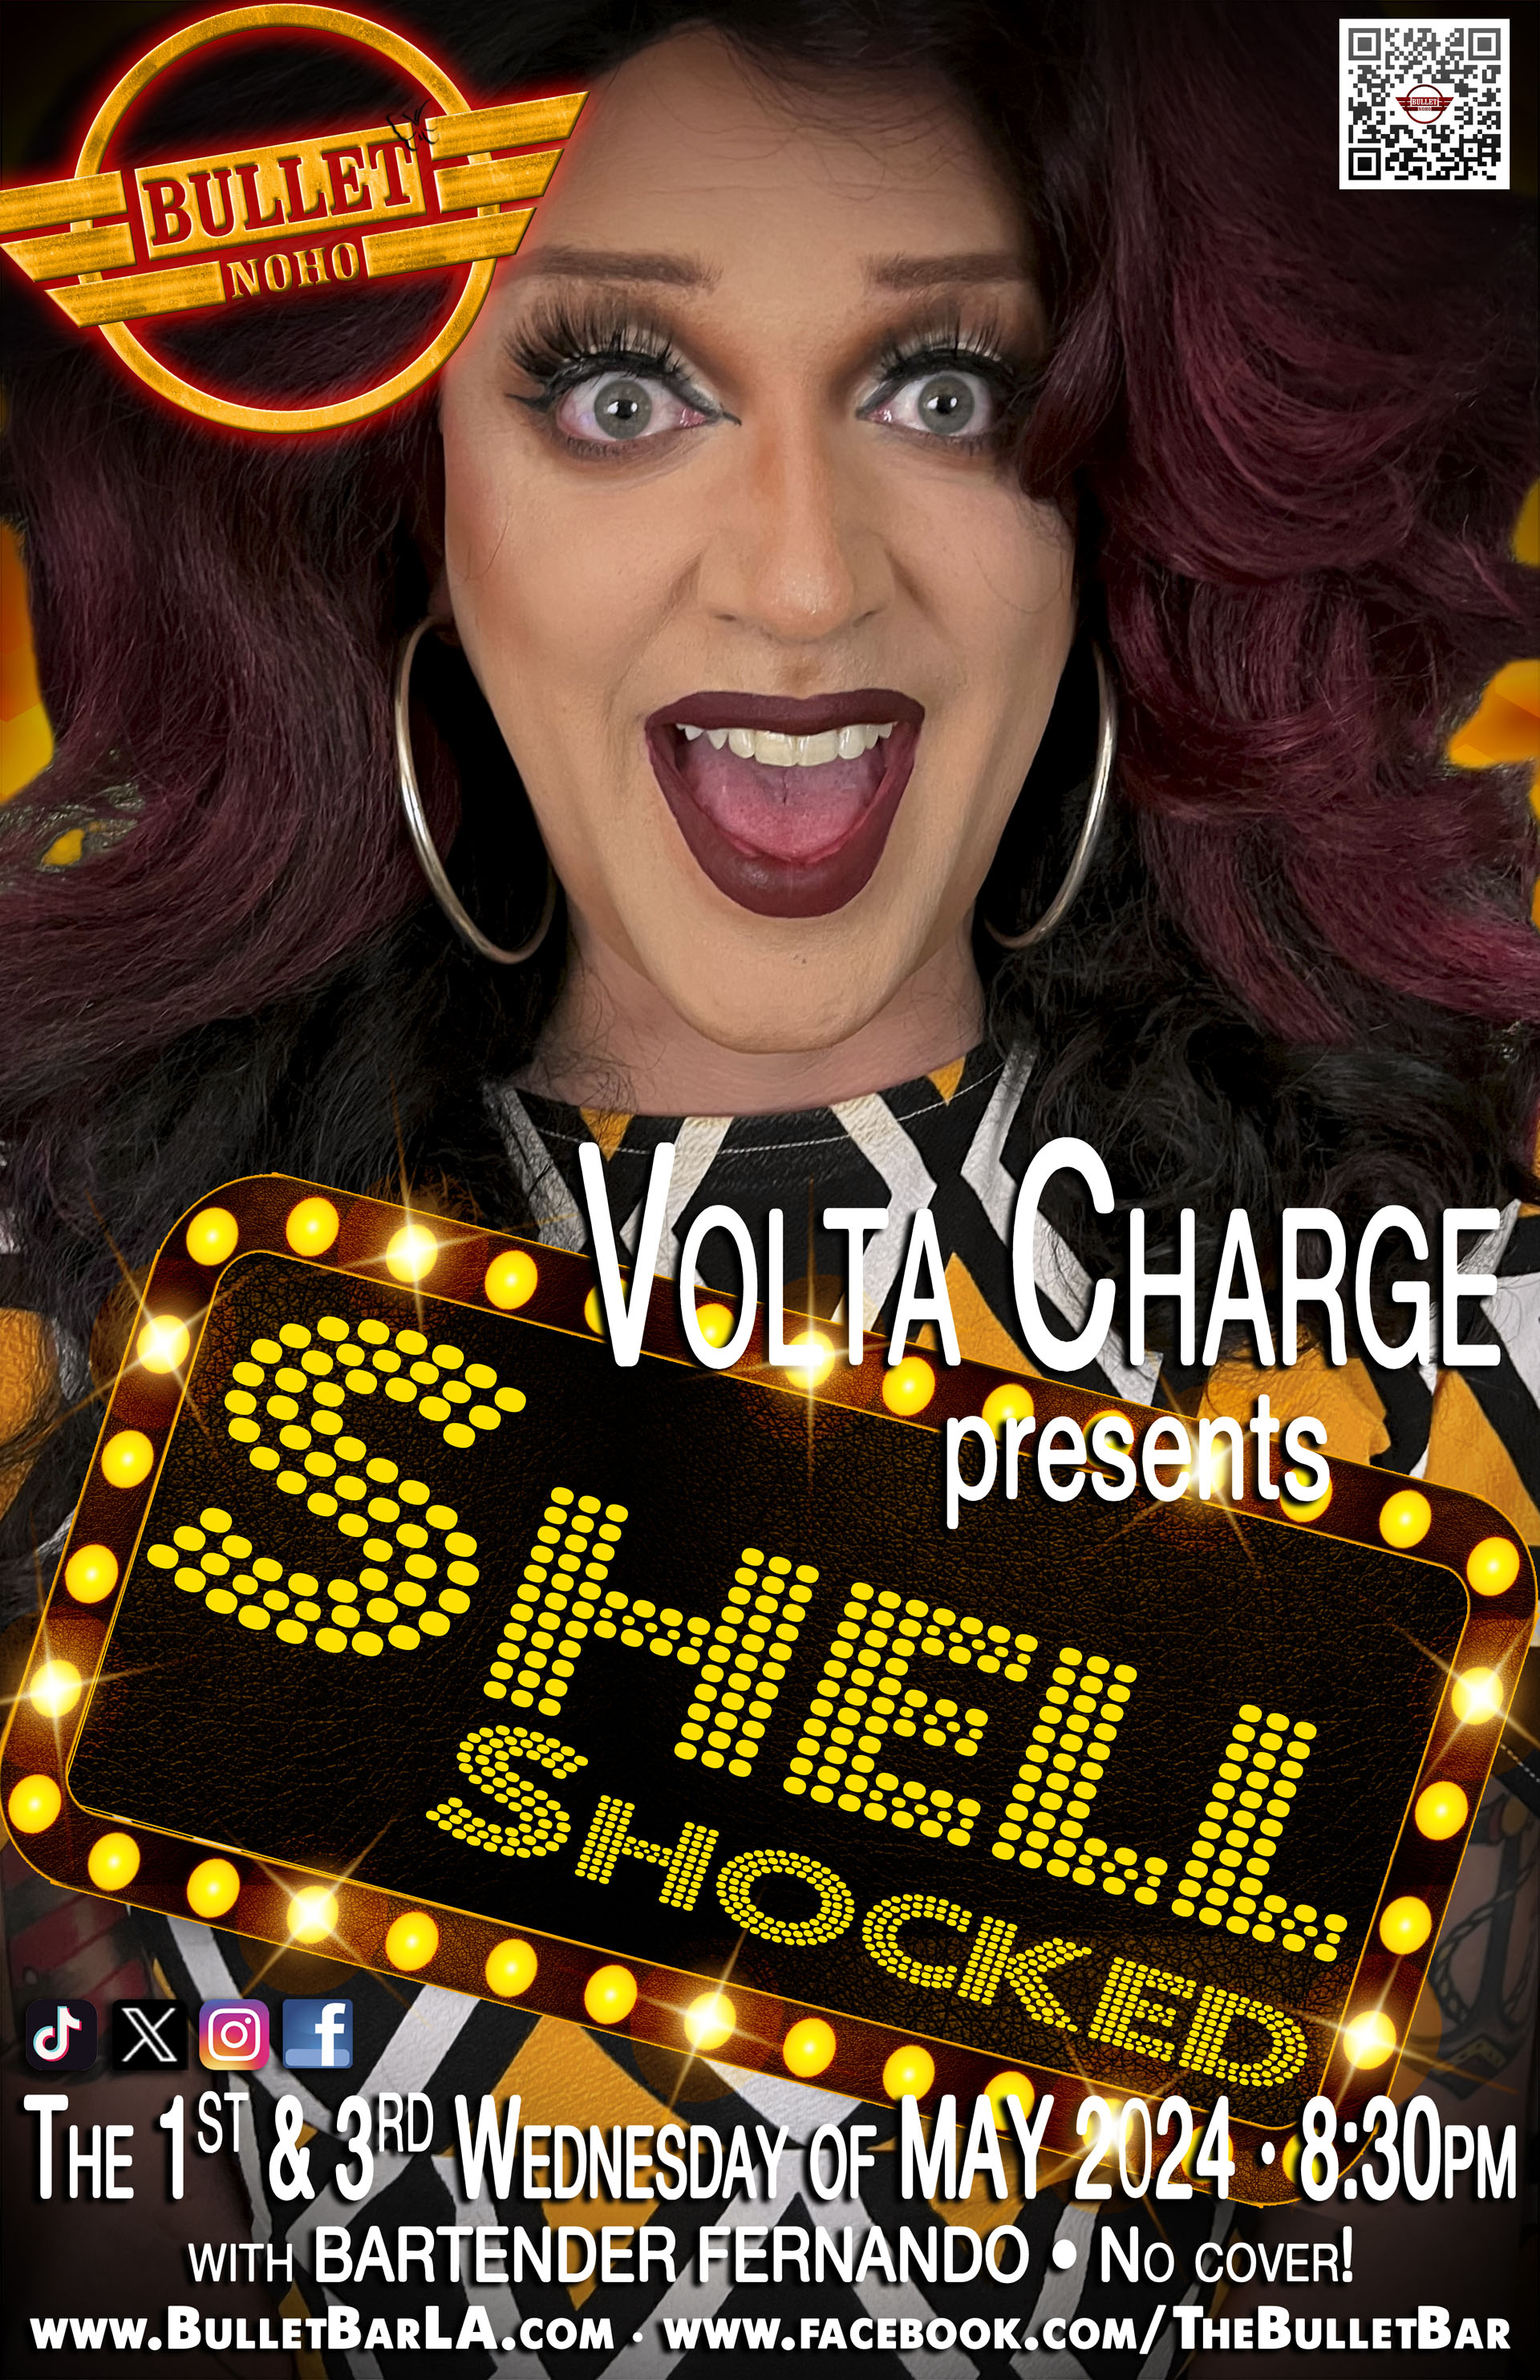 THE BULLET BAR & VOLTA CHARGE Present SHELL SHOCKED: Wednesday, 05/15/23 at 8:30 PM! No Cover!